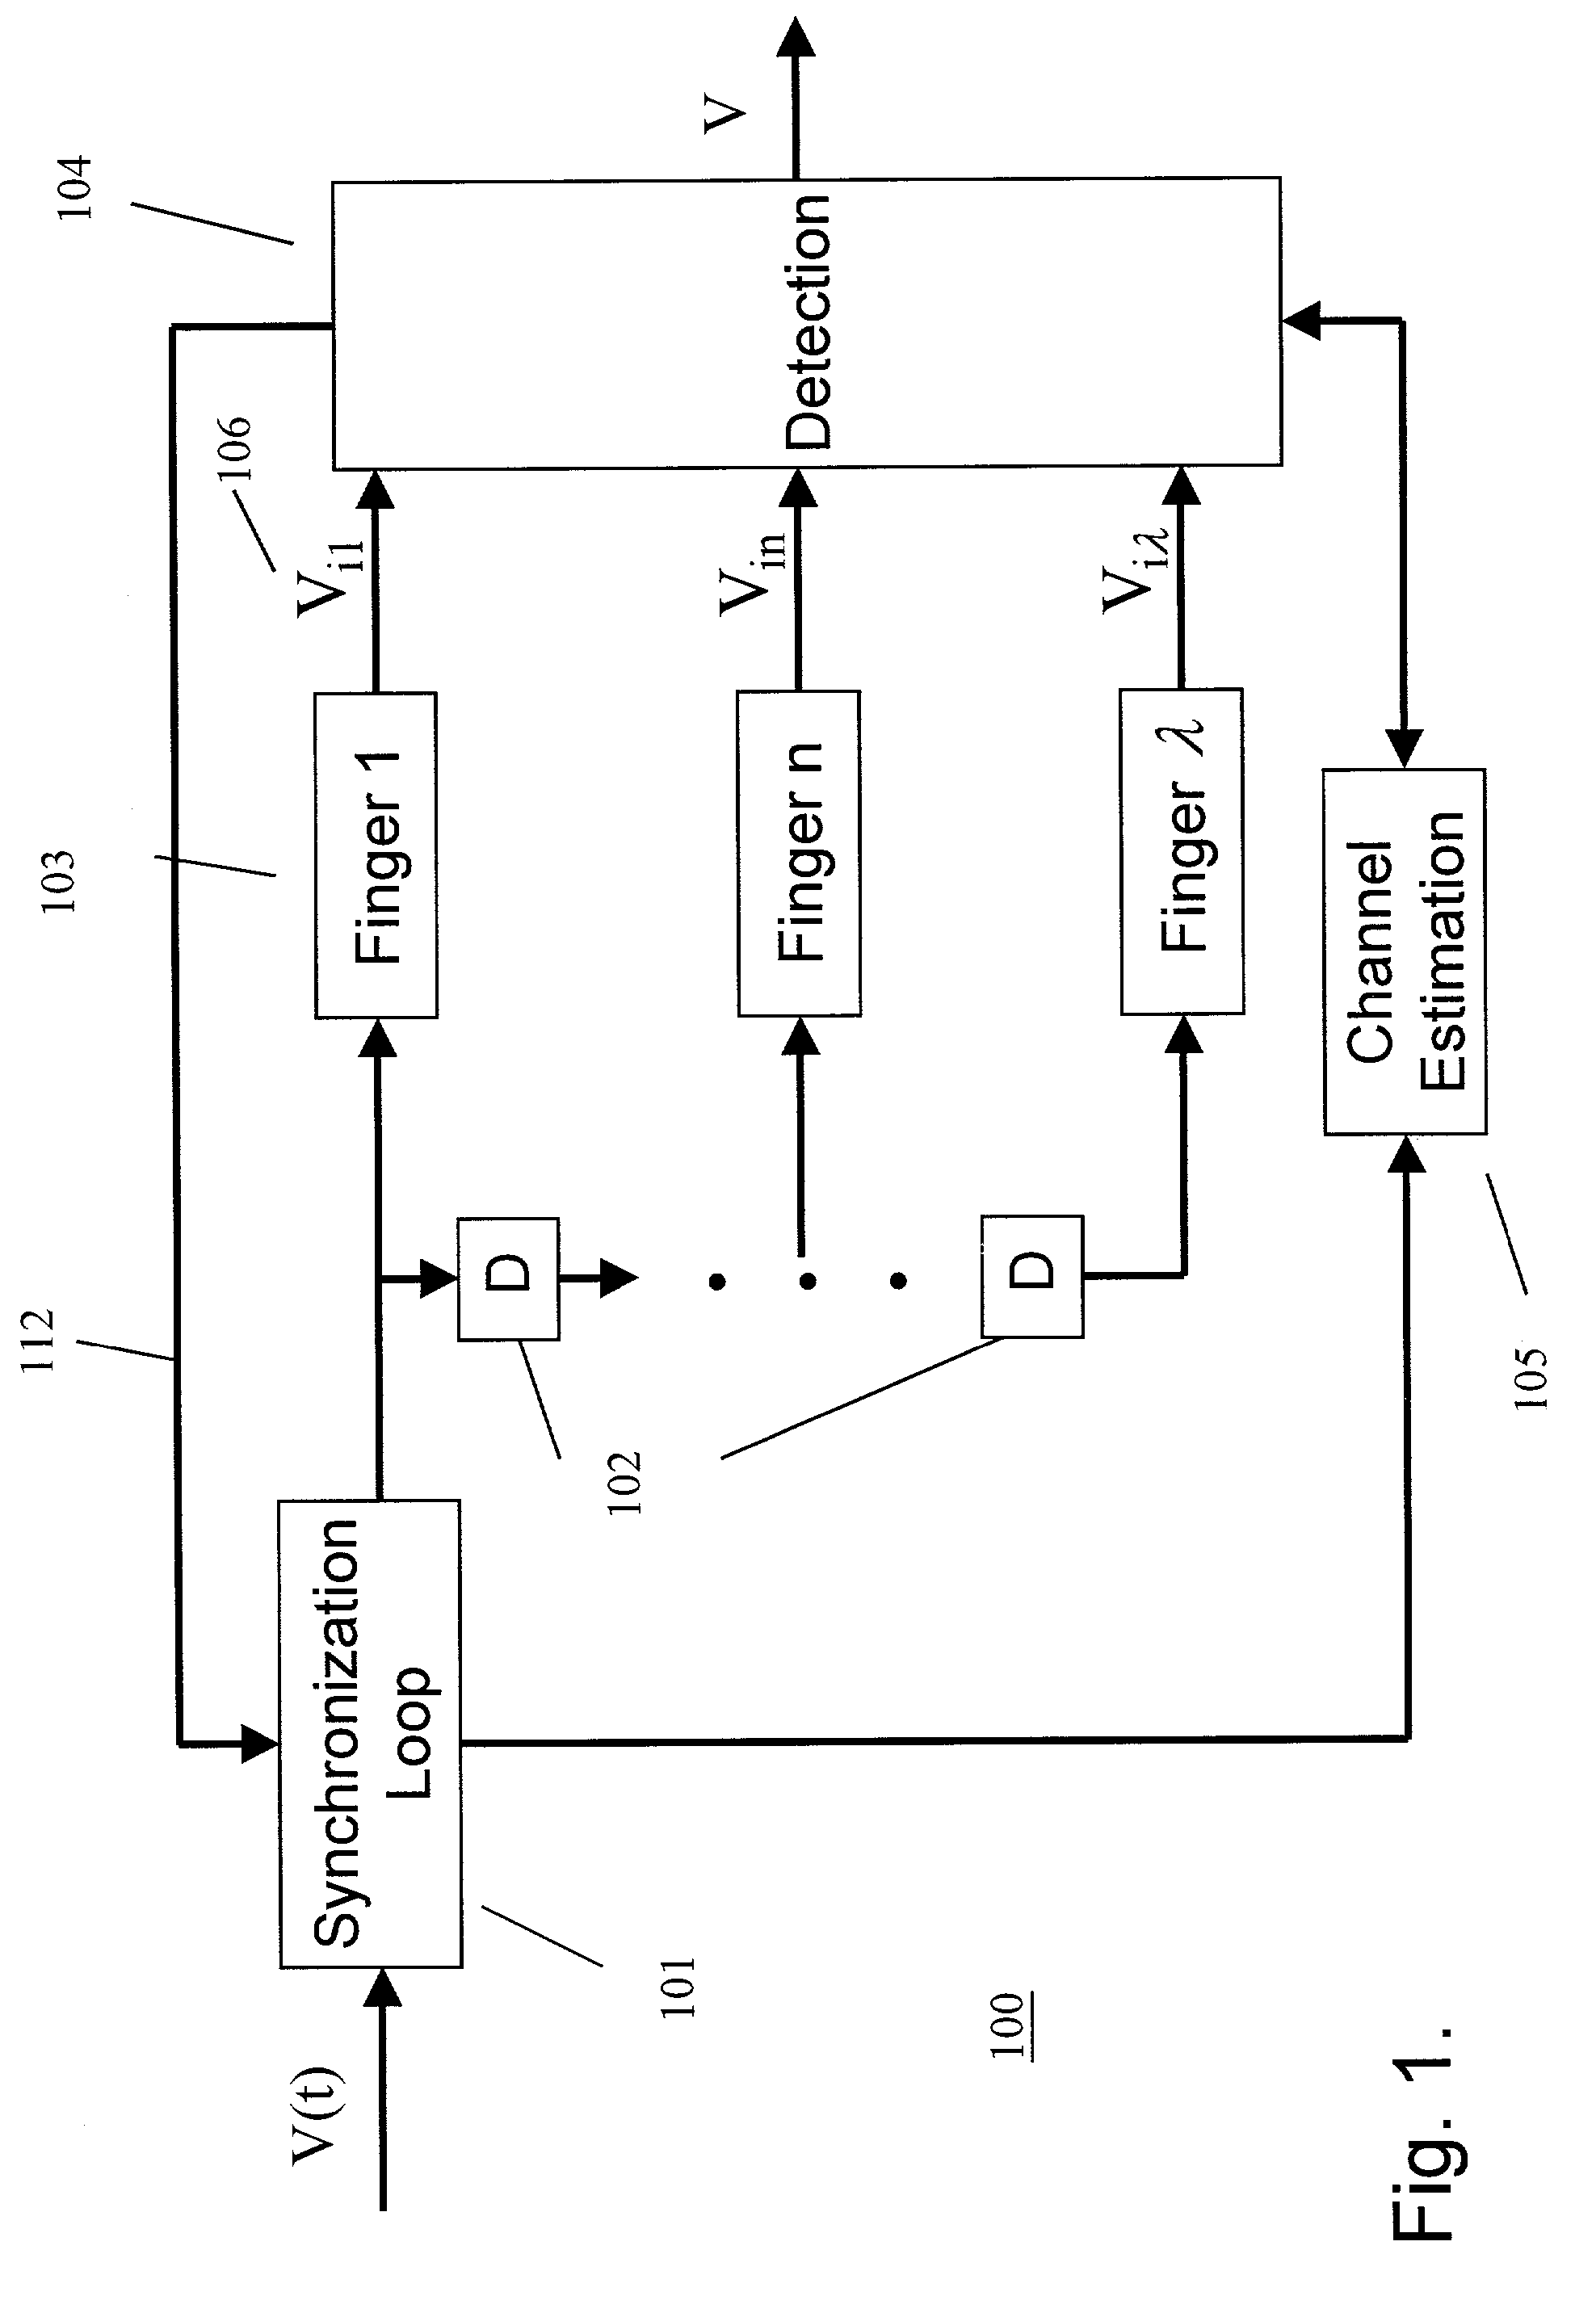 System and method for synchronizing multiuser signals for OFDM CDMA